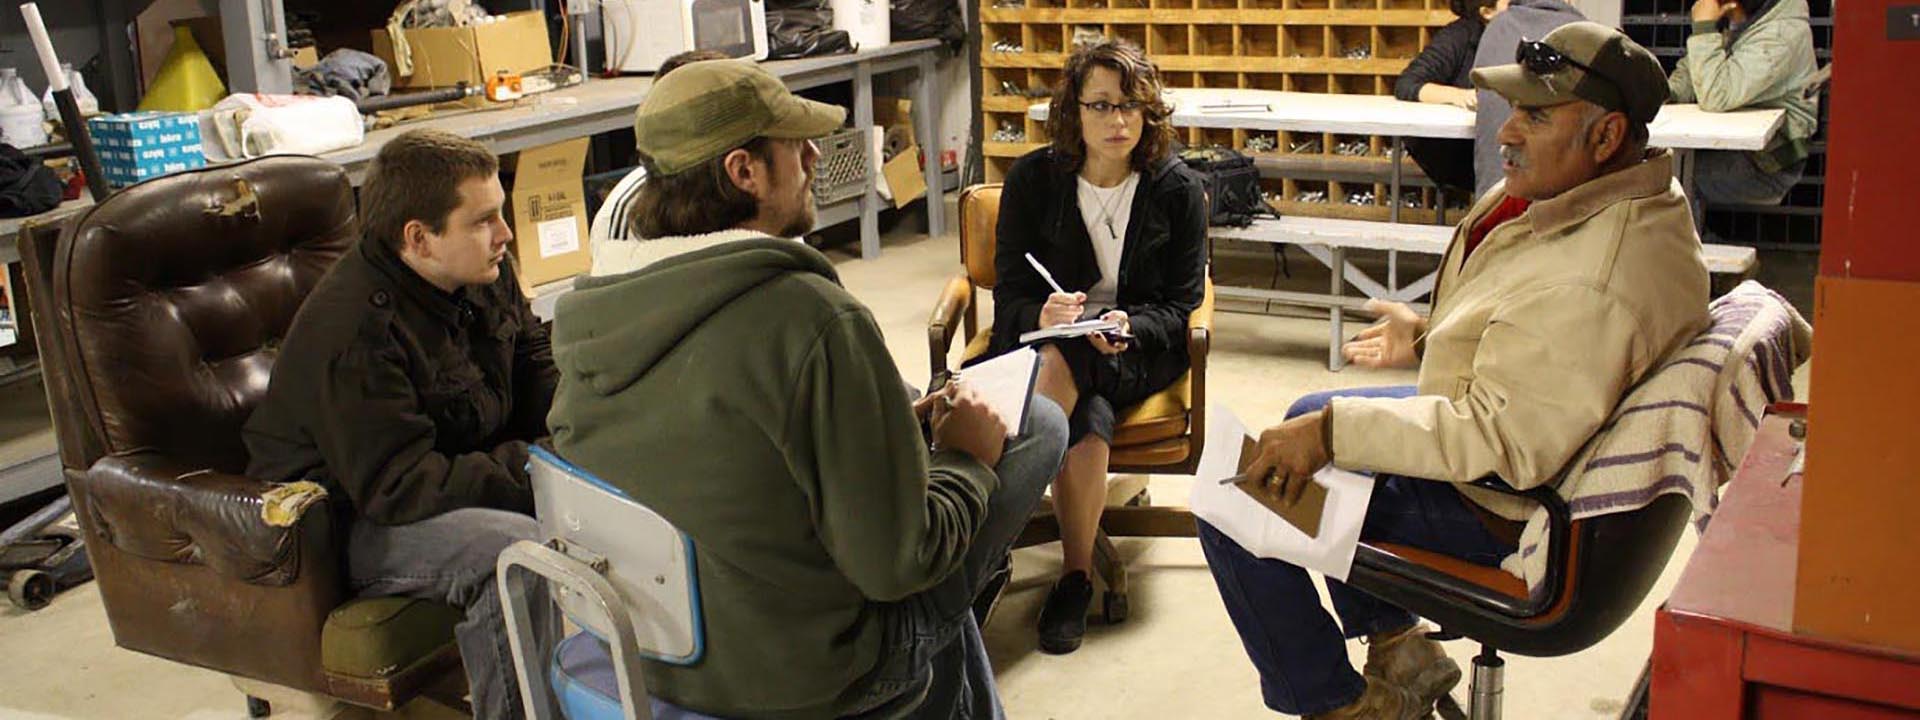 Northern Kentucky Univeristy Students Interviewing Farmworkers, 2009